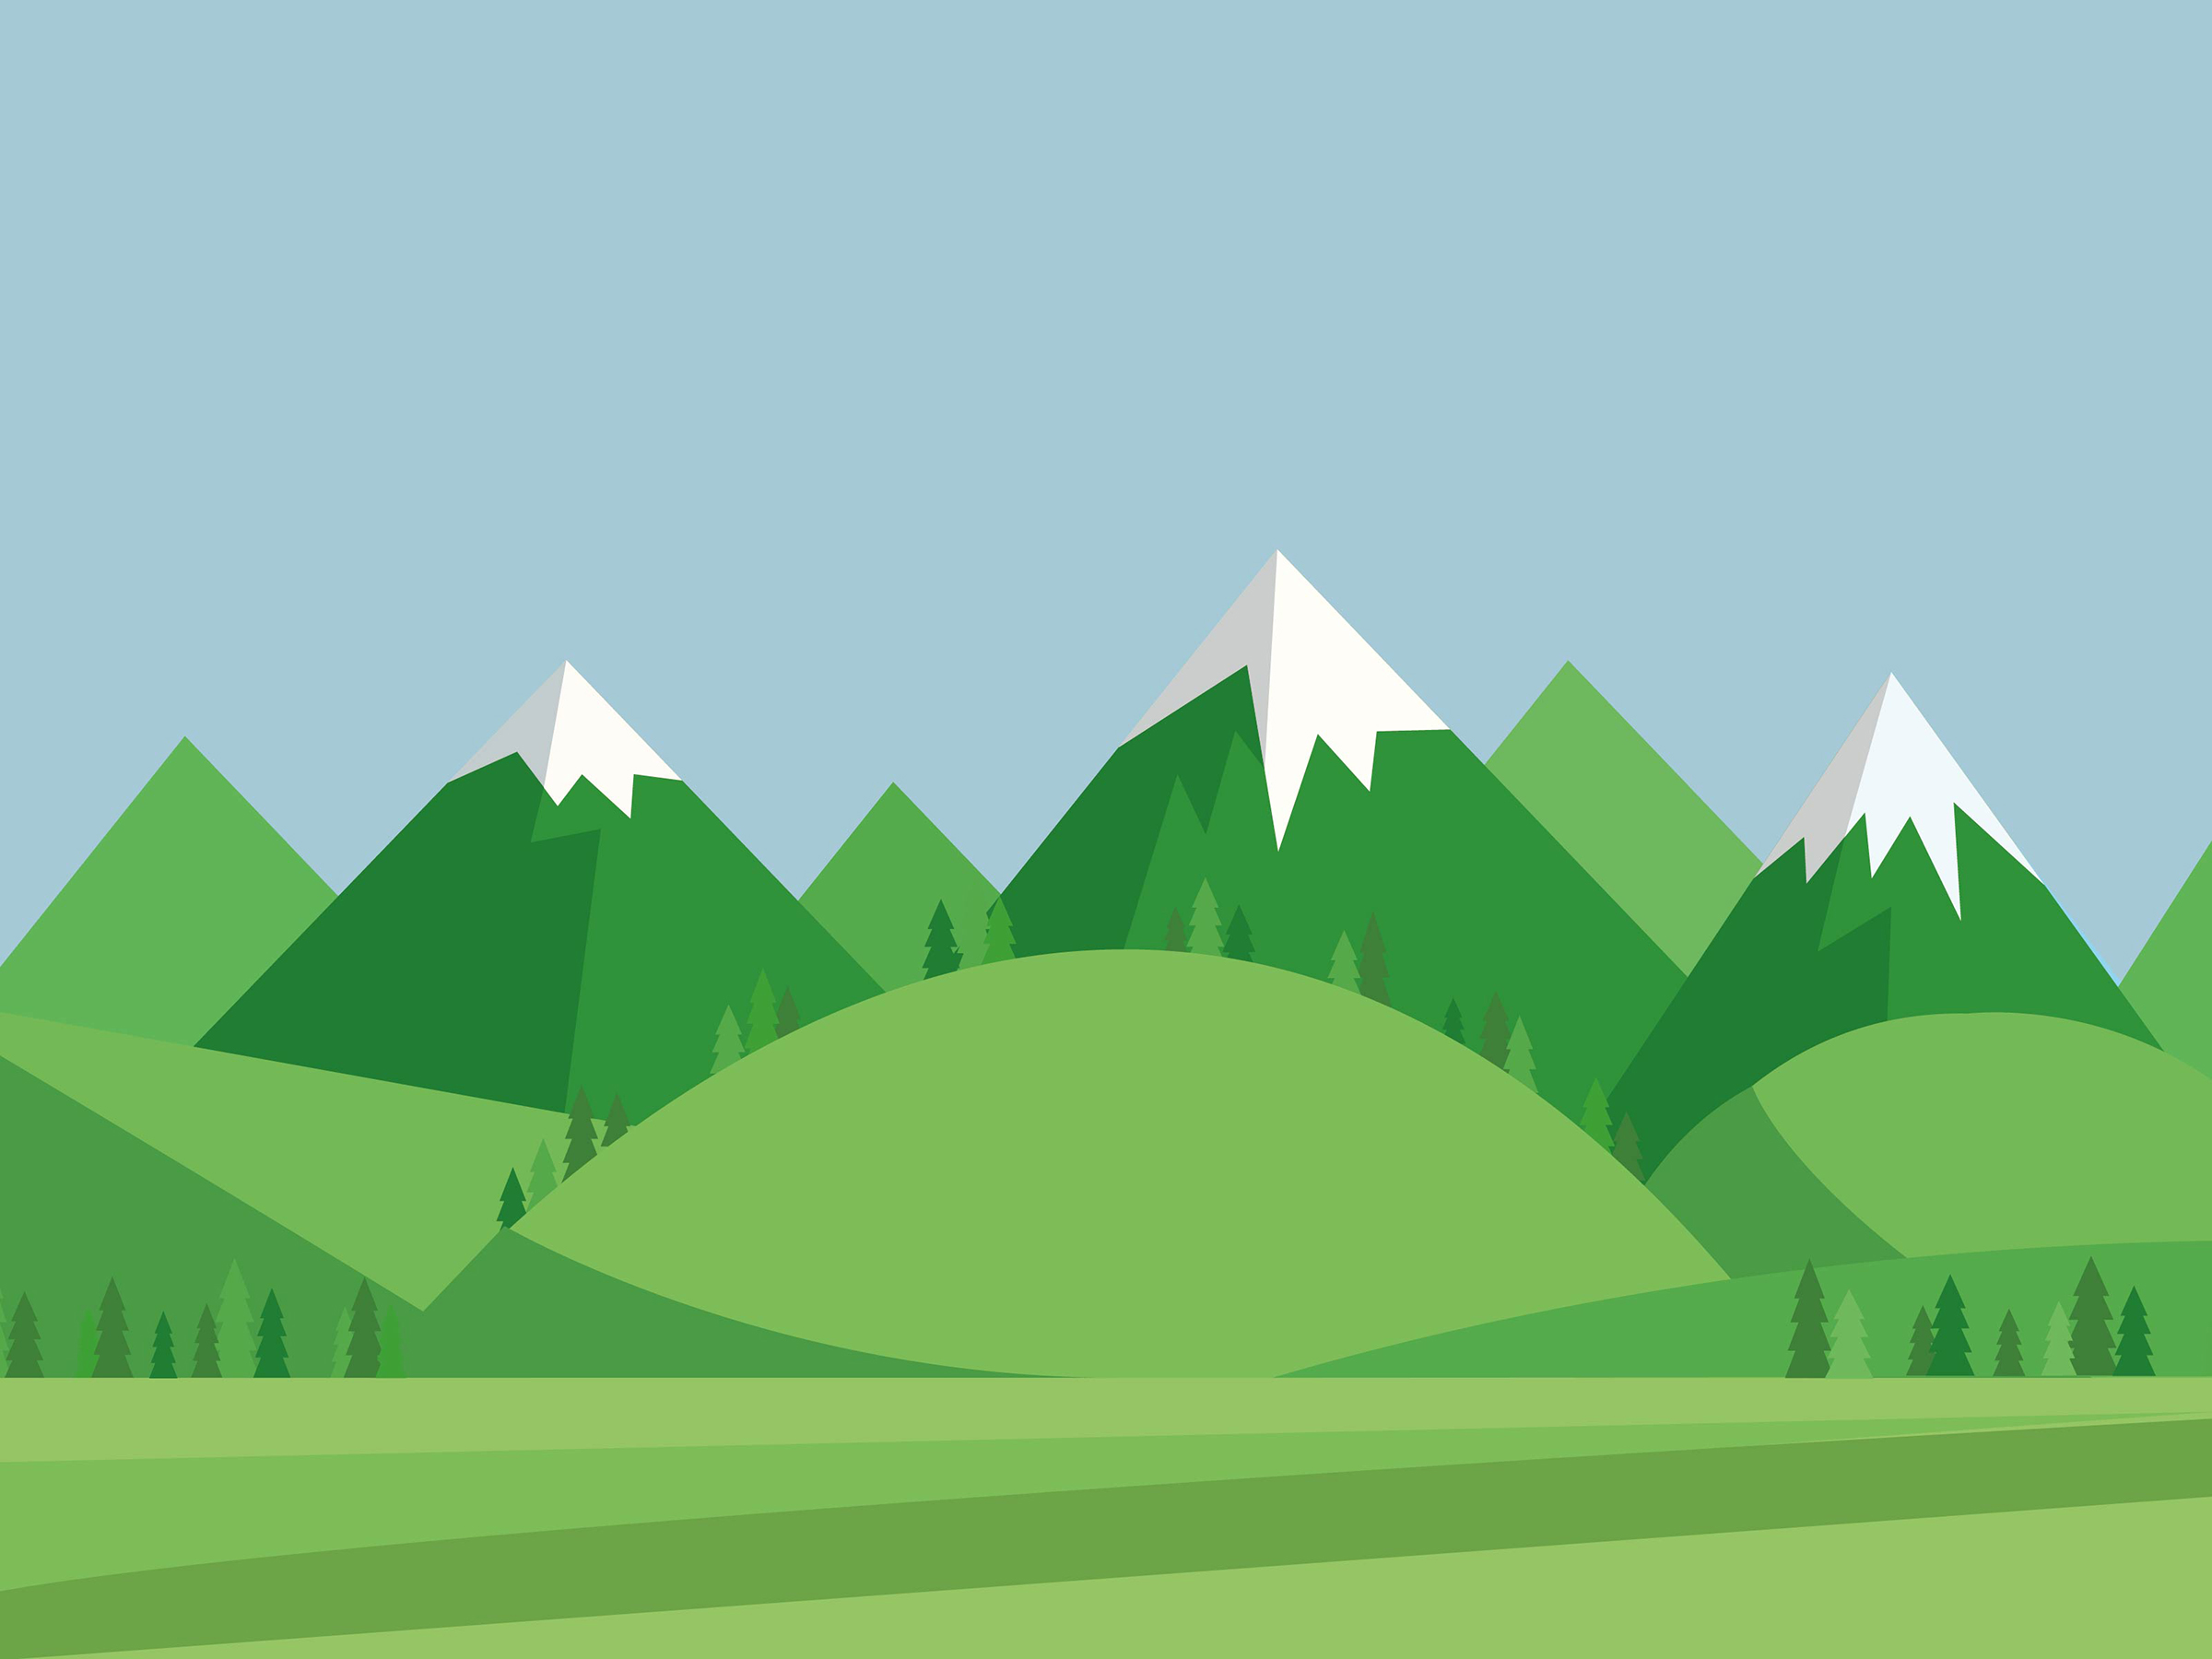 Green mountains with snowy peaks illustration